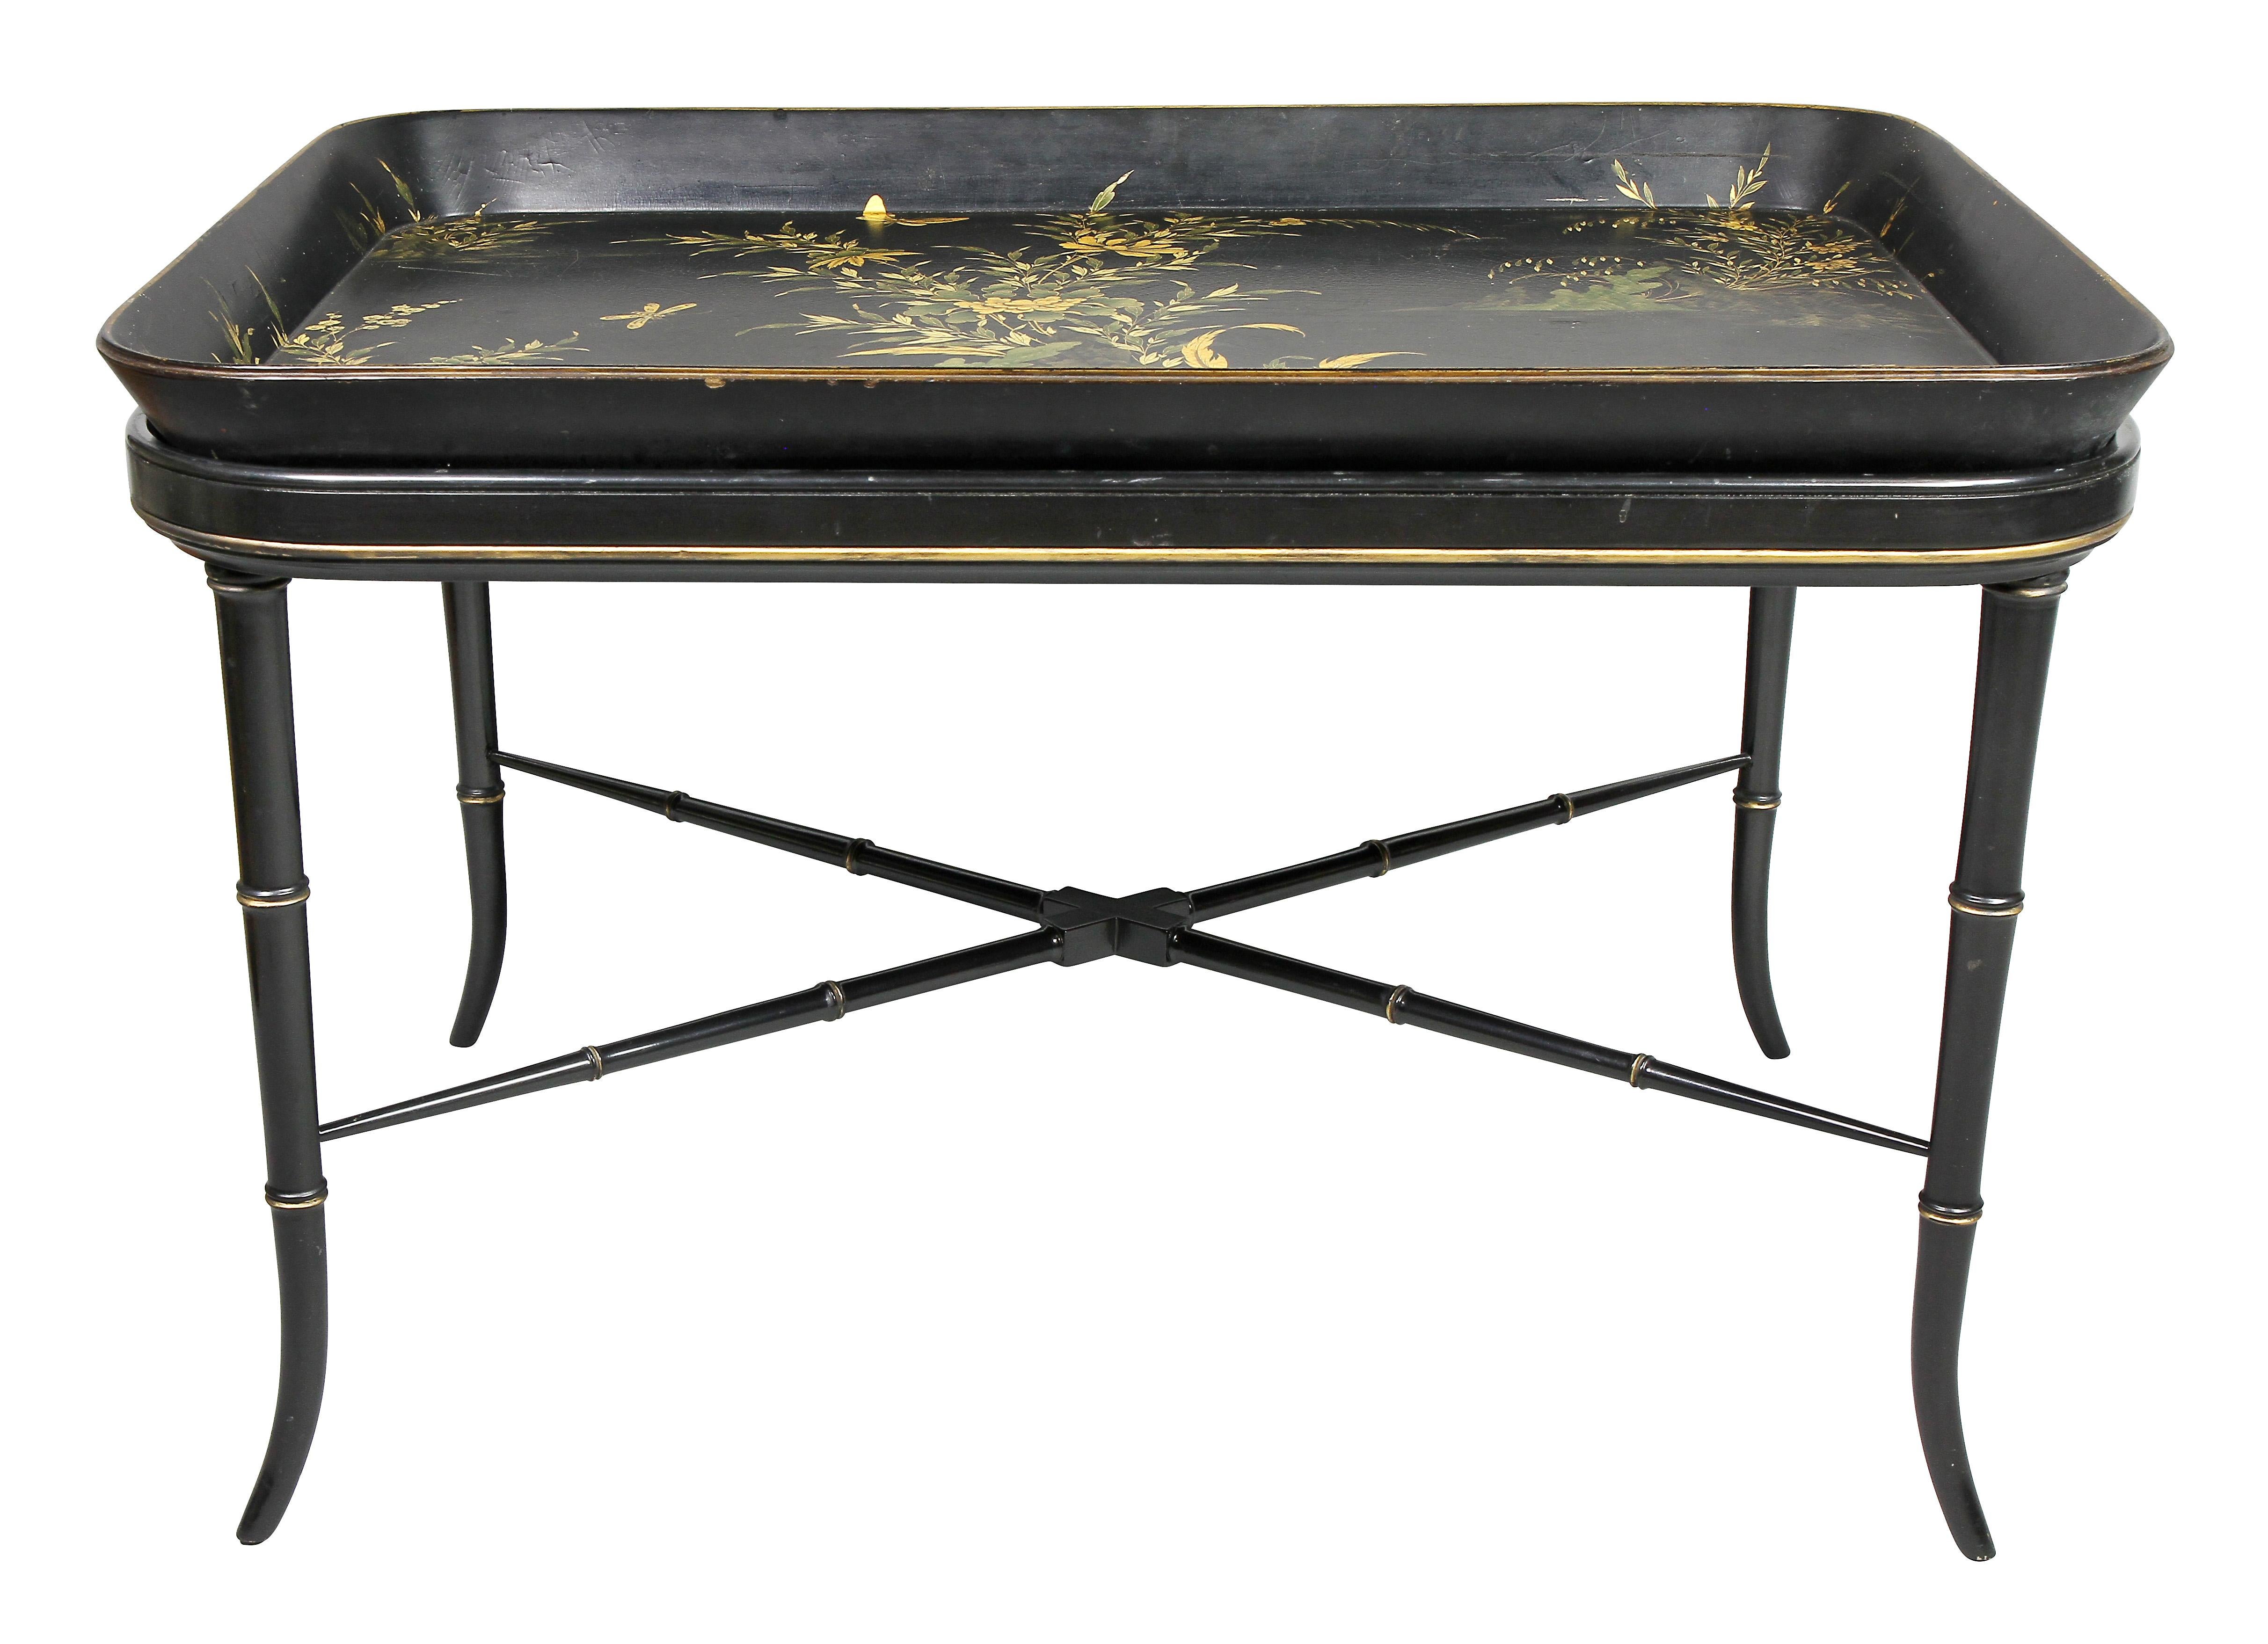 Rectangular shape with black ground decorated with flowers, leaves and butterflies, later bamboo turned base.